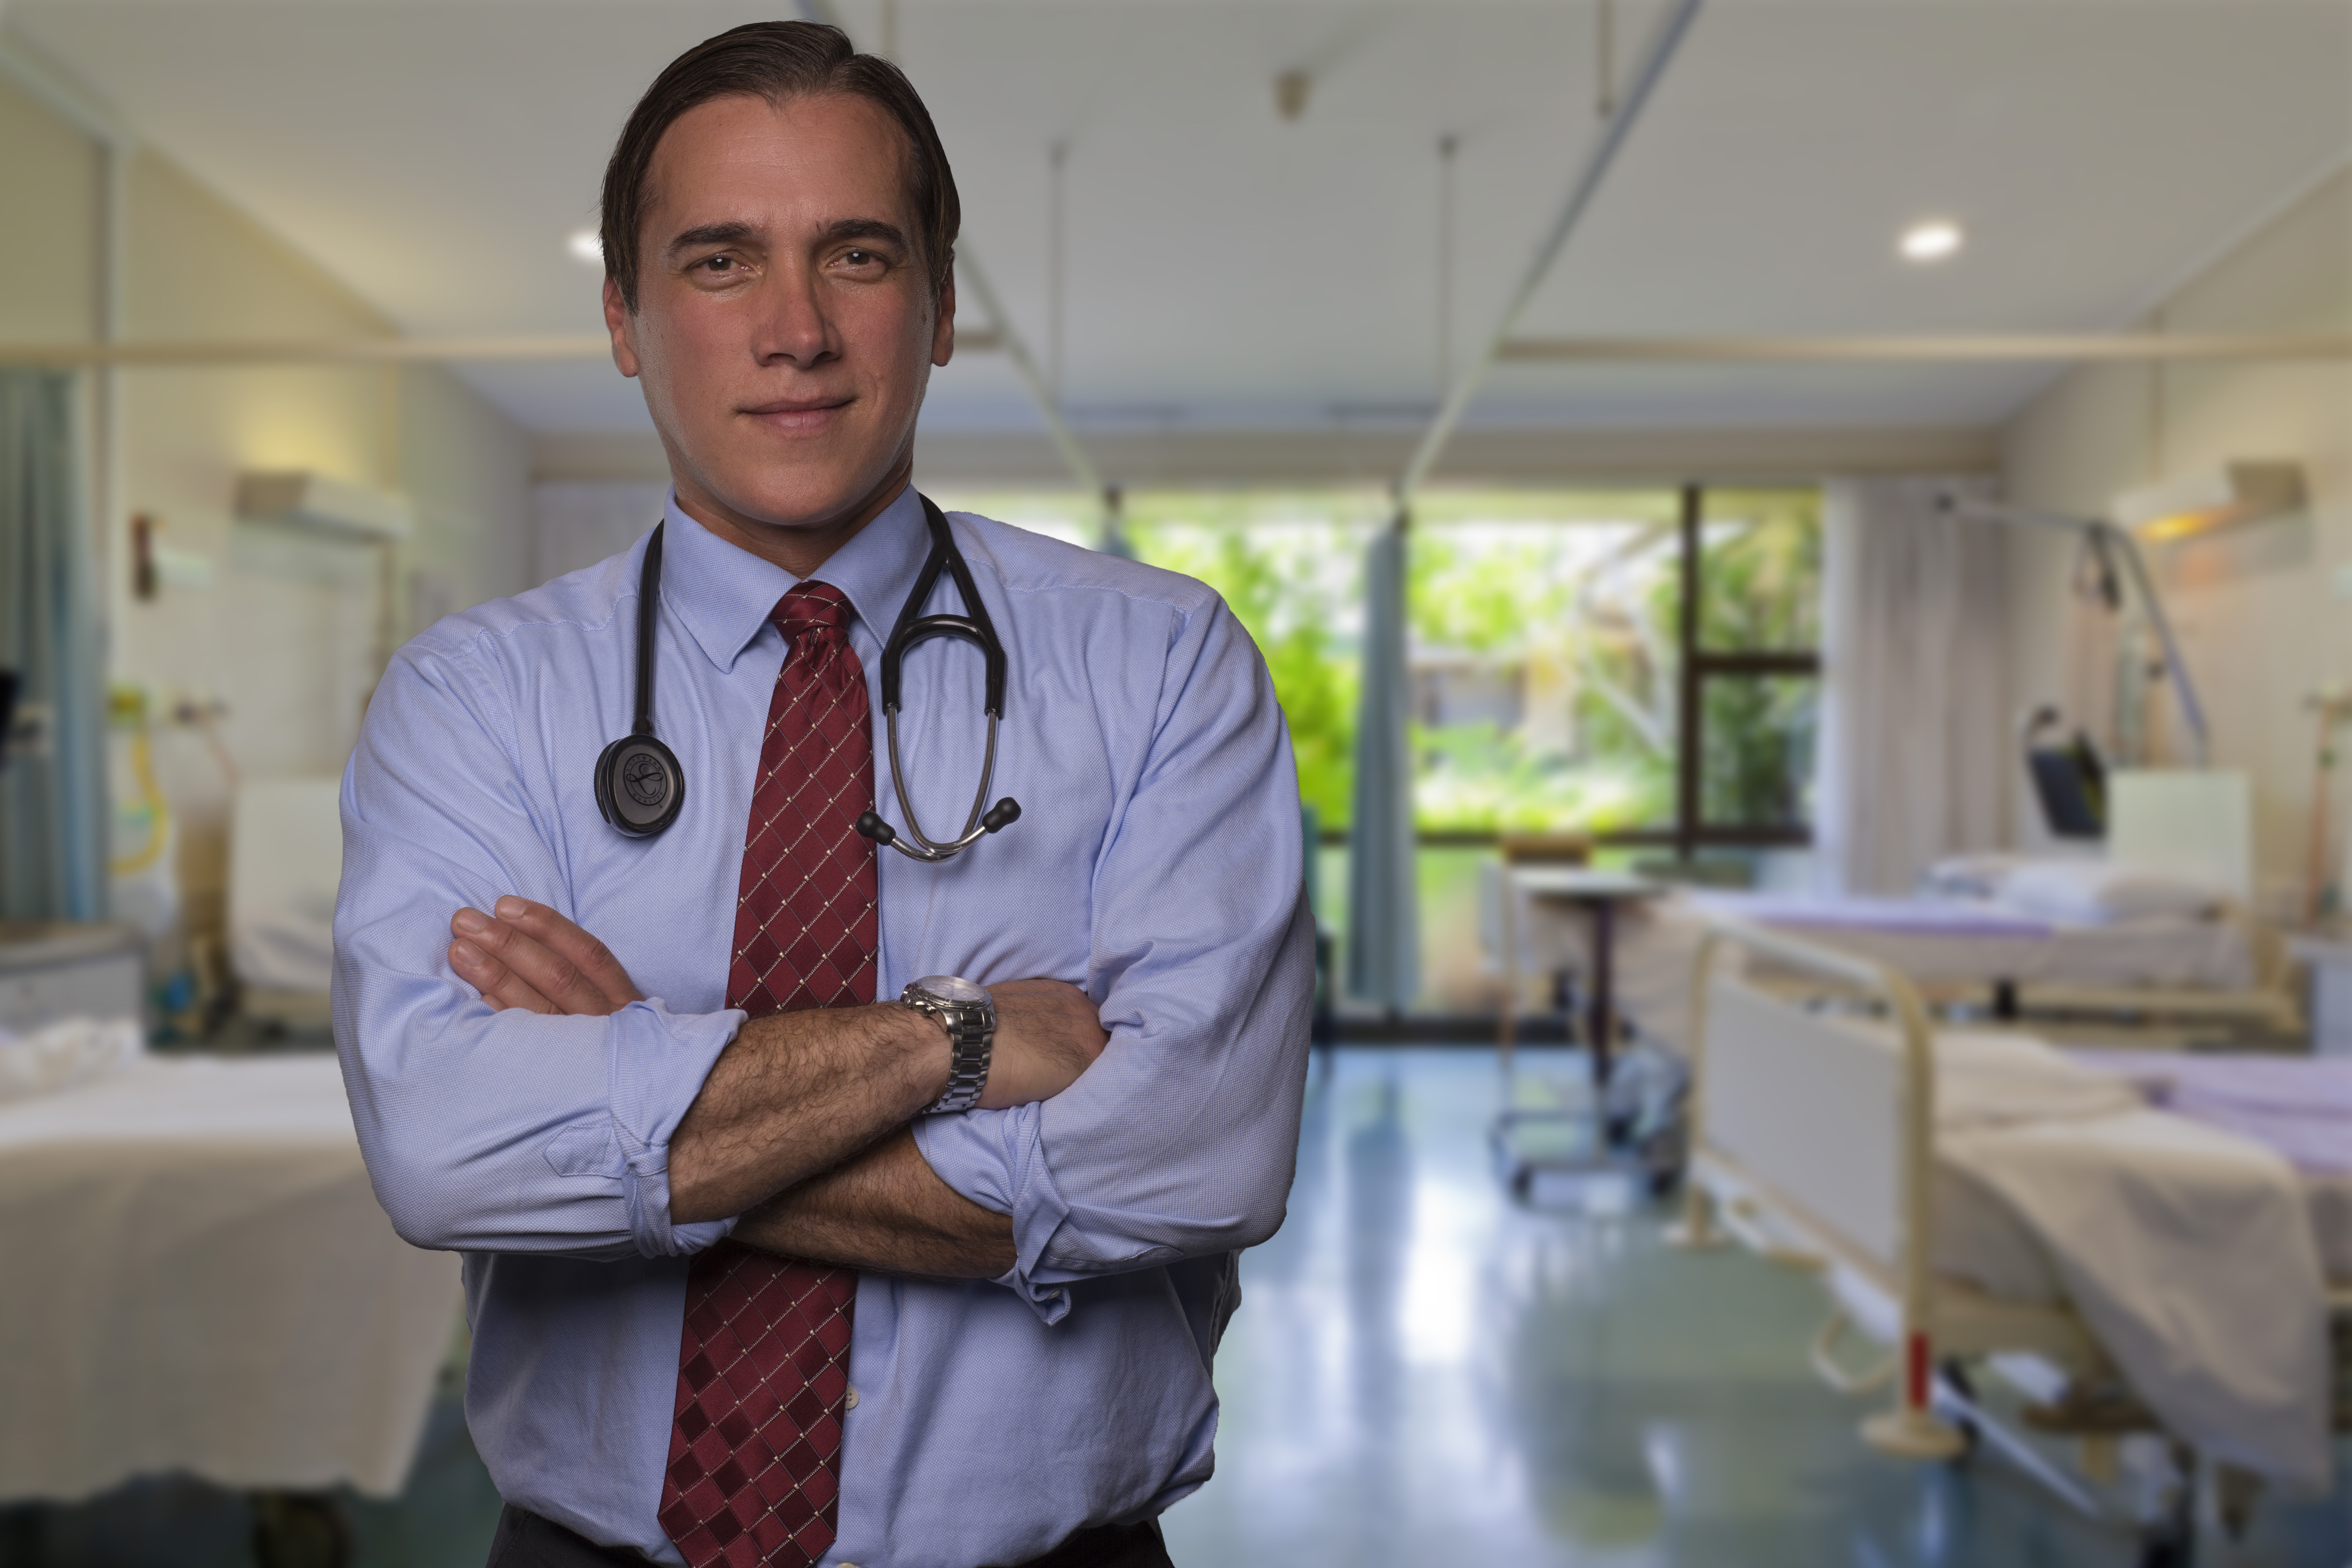 San Diego's “Top Doctor” Takes On Insurance Goliath